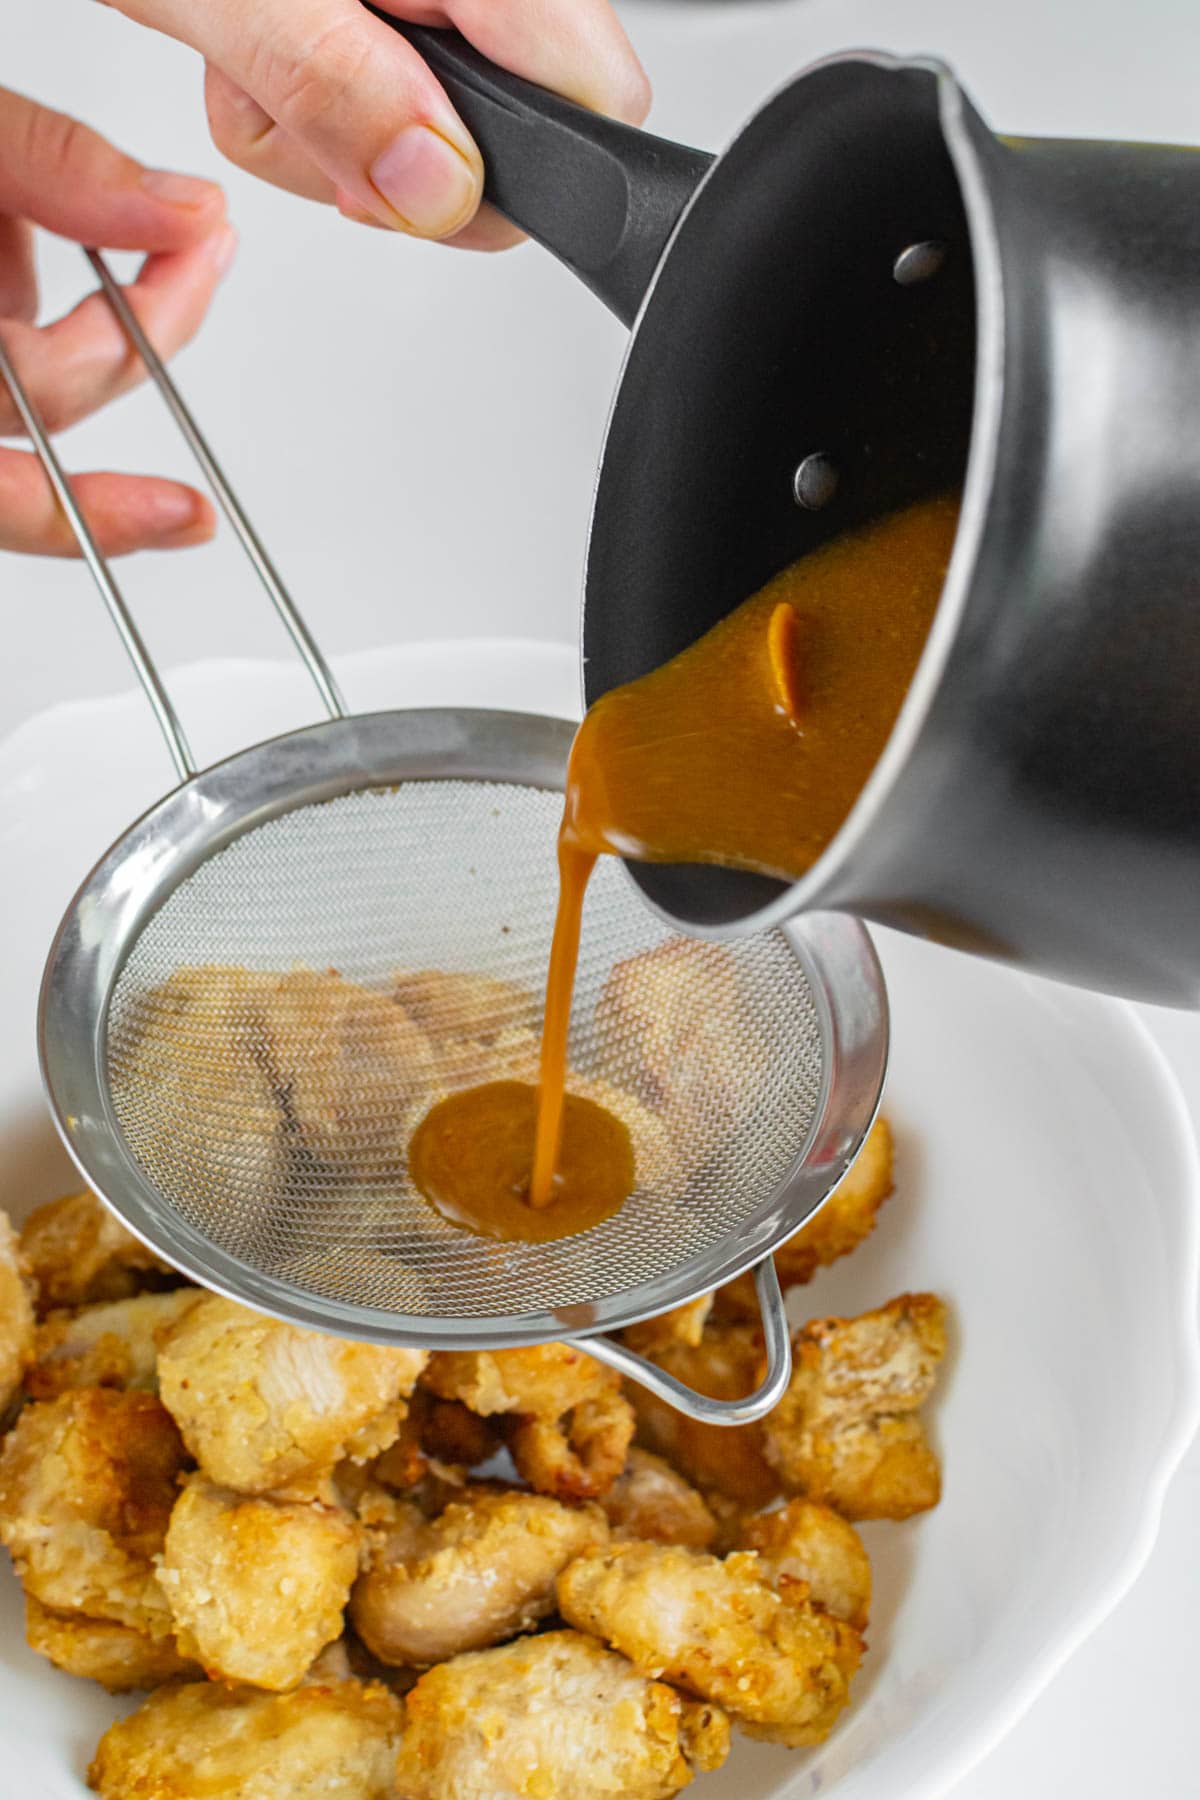 Pouring orange sauce over air fried chicken breast pieces.